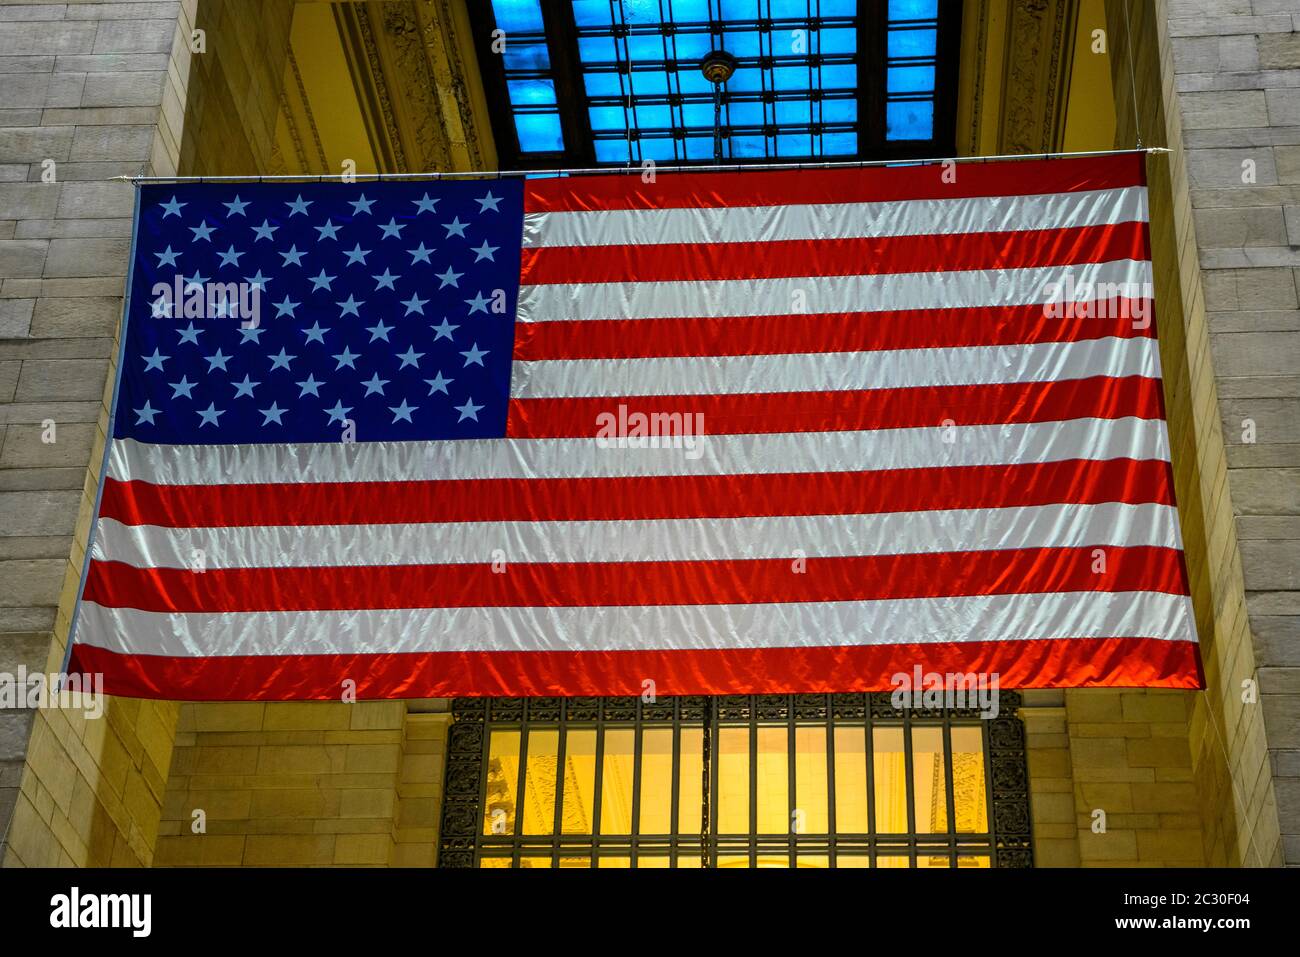 United States of America flag at Grand Central Station, Grand Central Terminal, Manhattan, New York City, New York State, USA Stock Photo